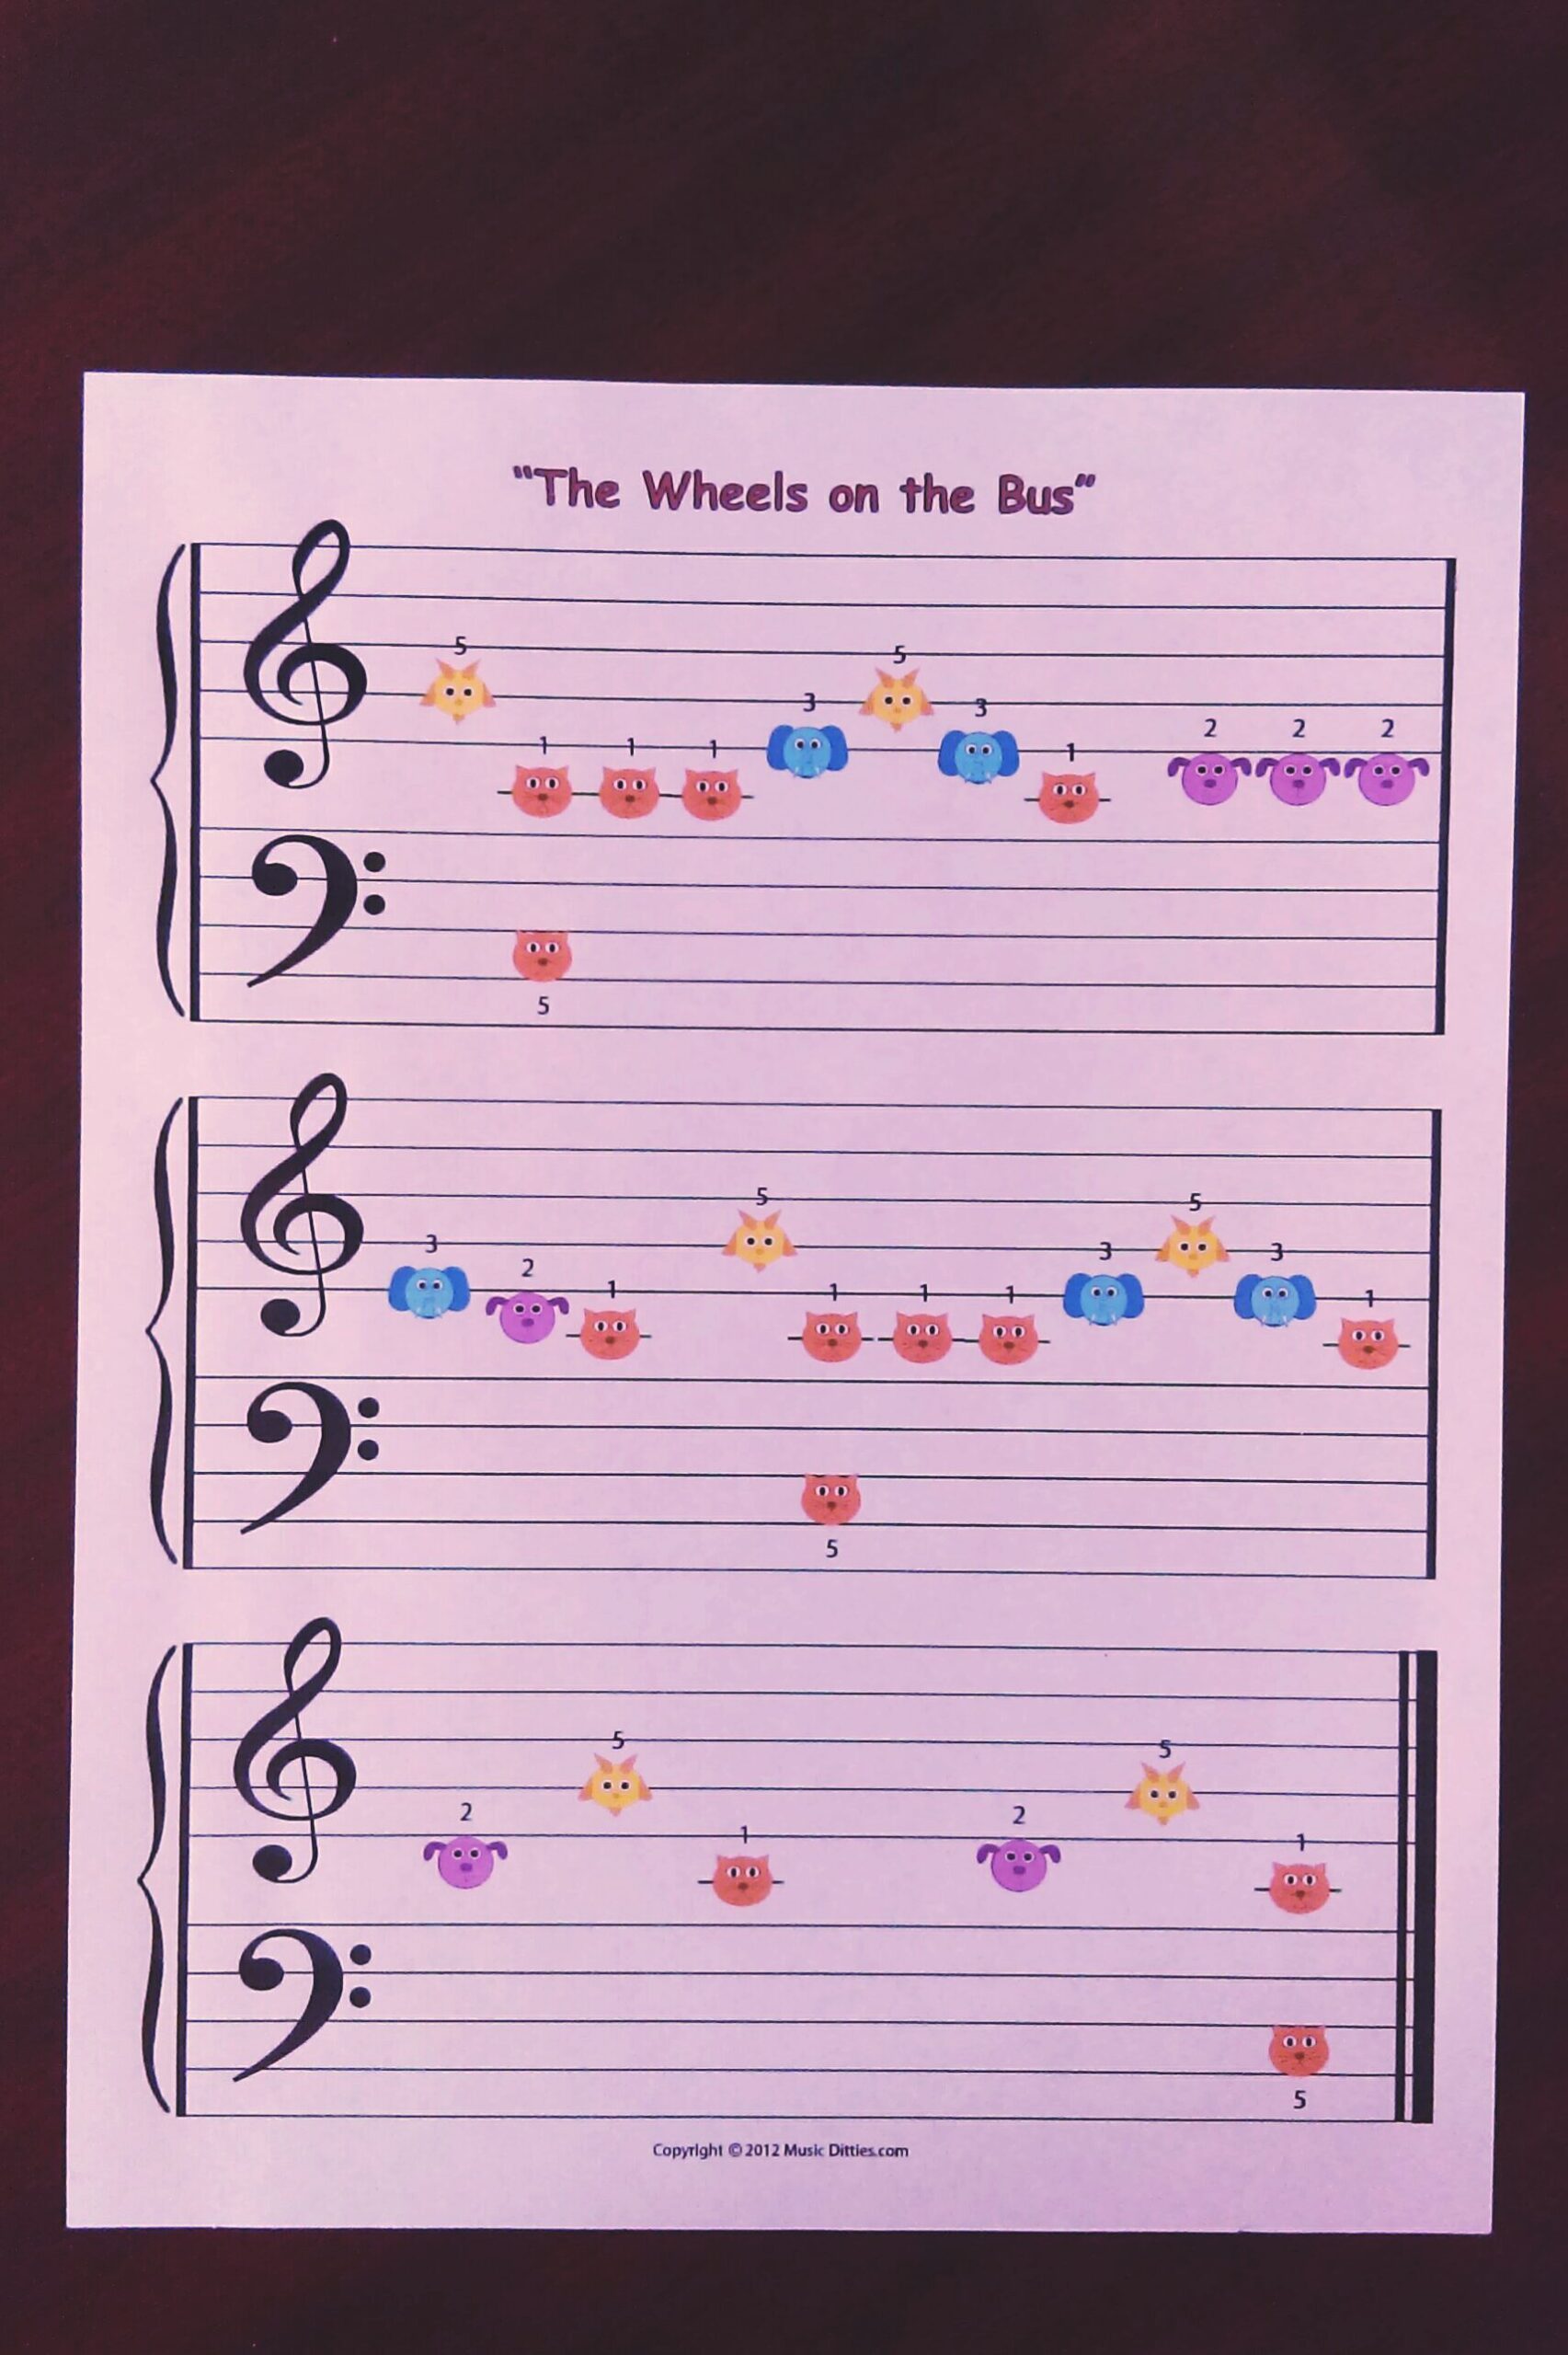 Colorful piano notations for The Wheel on the Bus